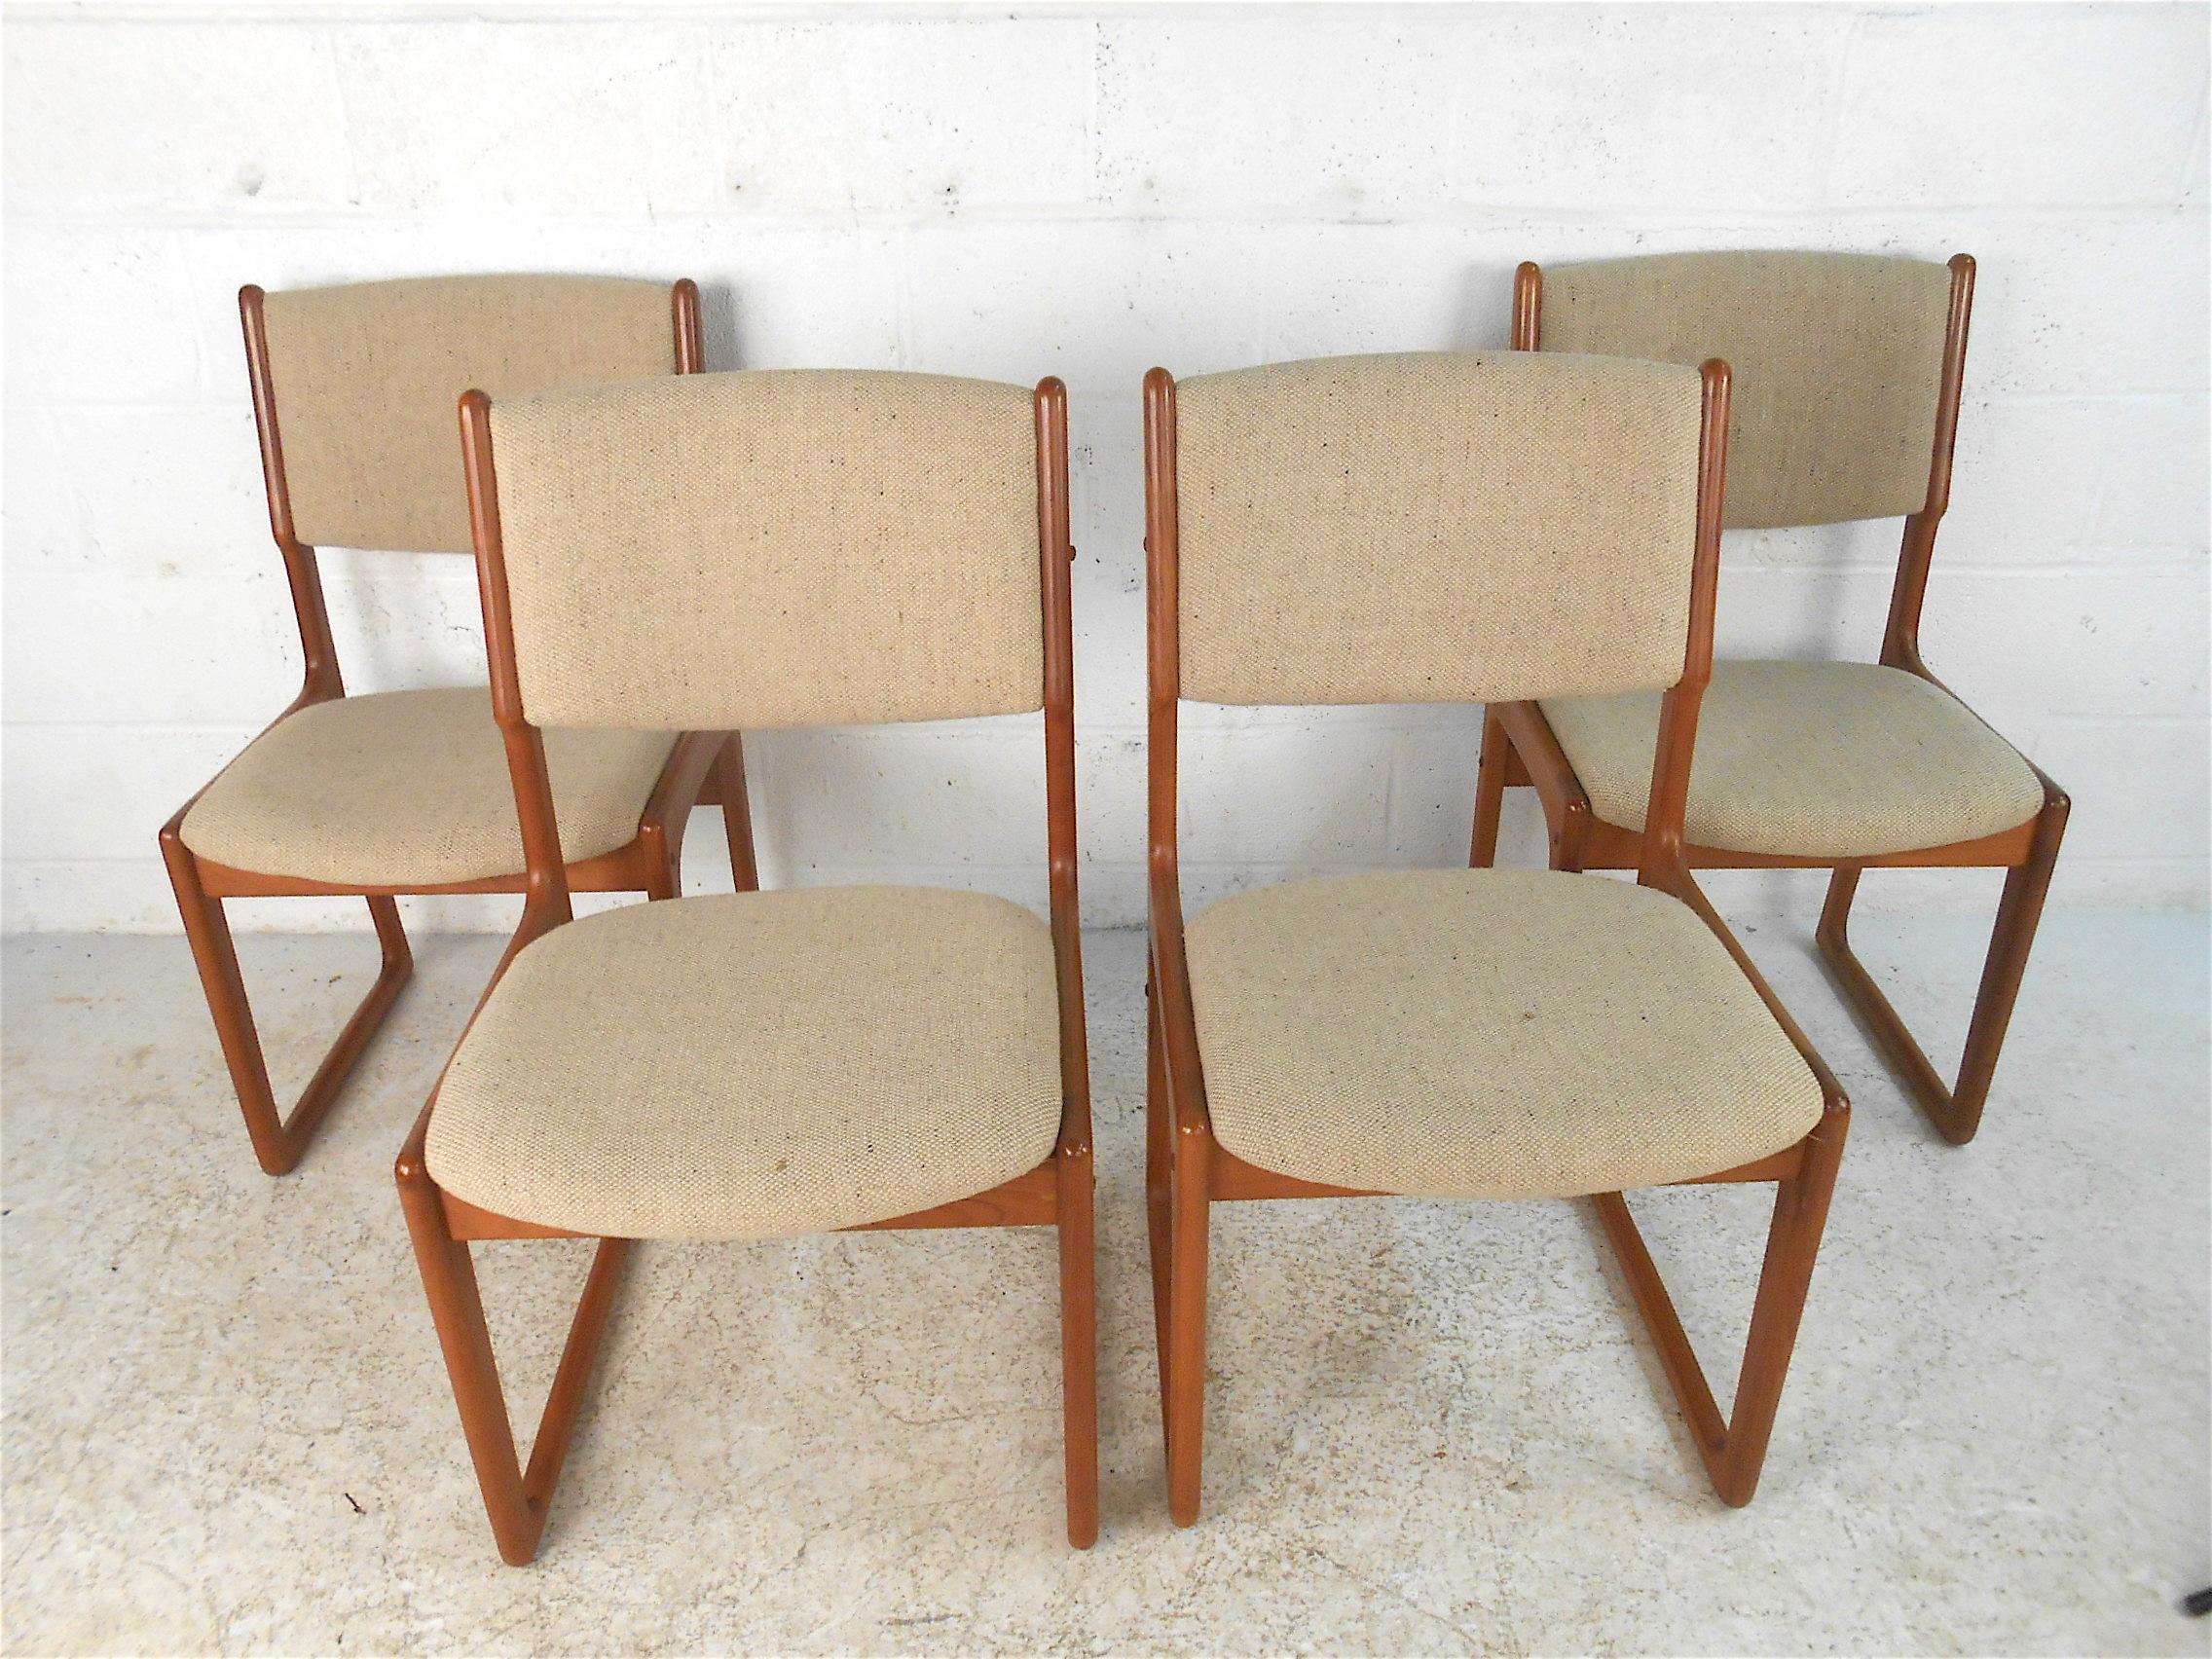 Stylish set of 4 Danish modern dining chairs by Benny Linden. Sturdily constructed with handsome joinery showcased on the frames, covered in a vintage beige upholstery. Sled legs and a stretcher across the back of the frame gives these chairs an